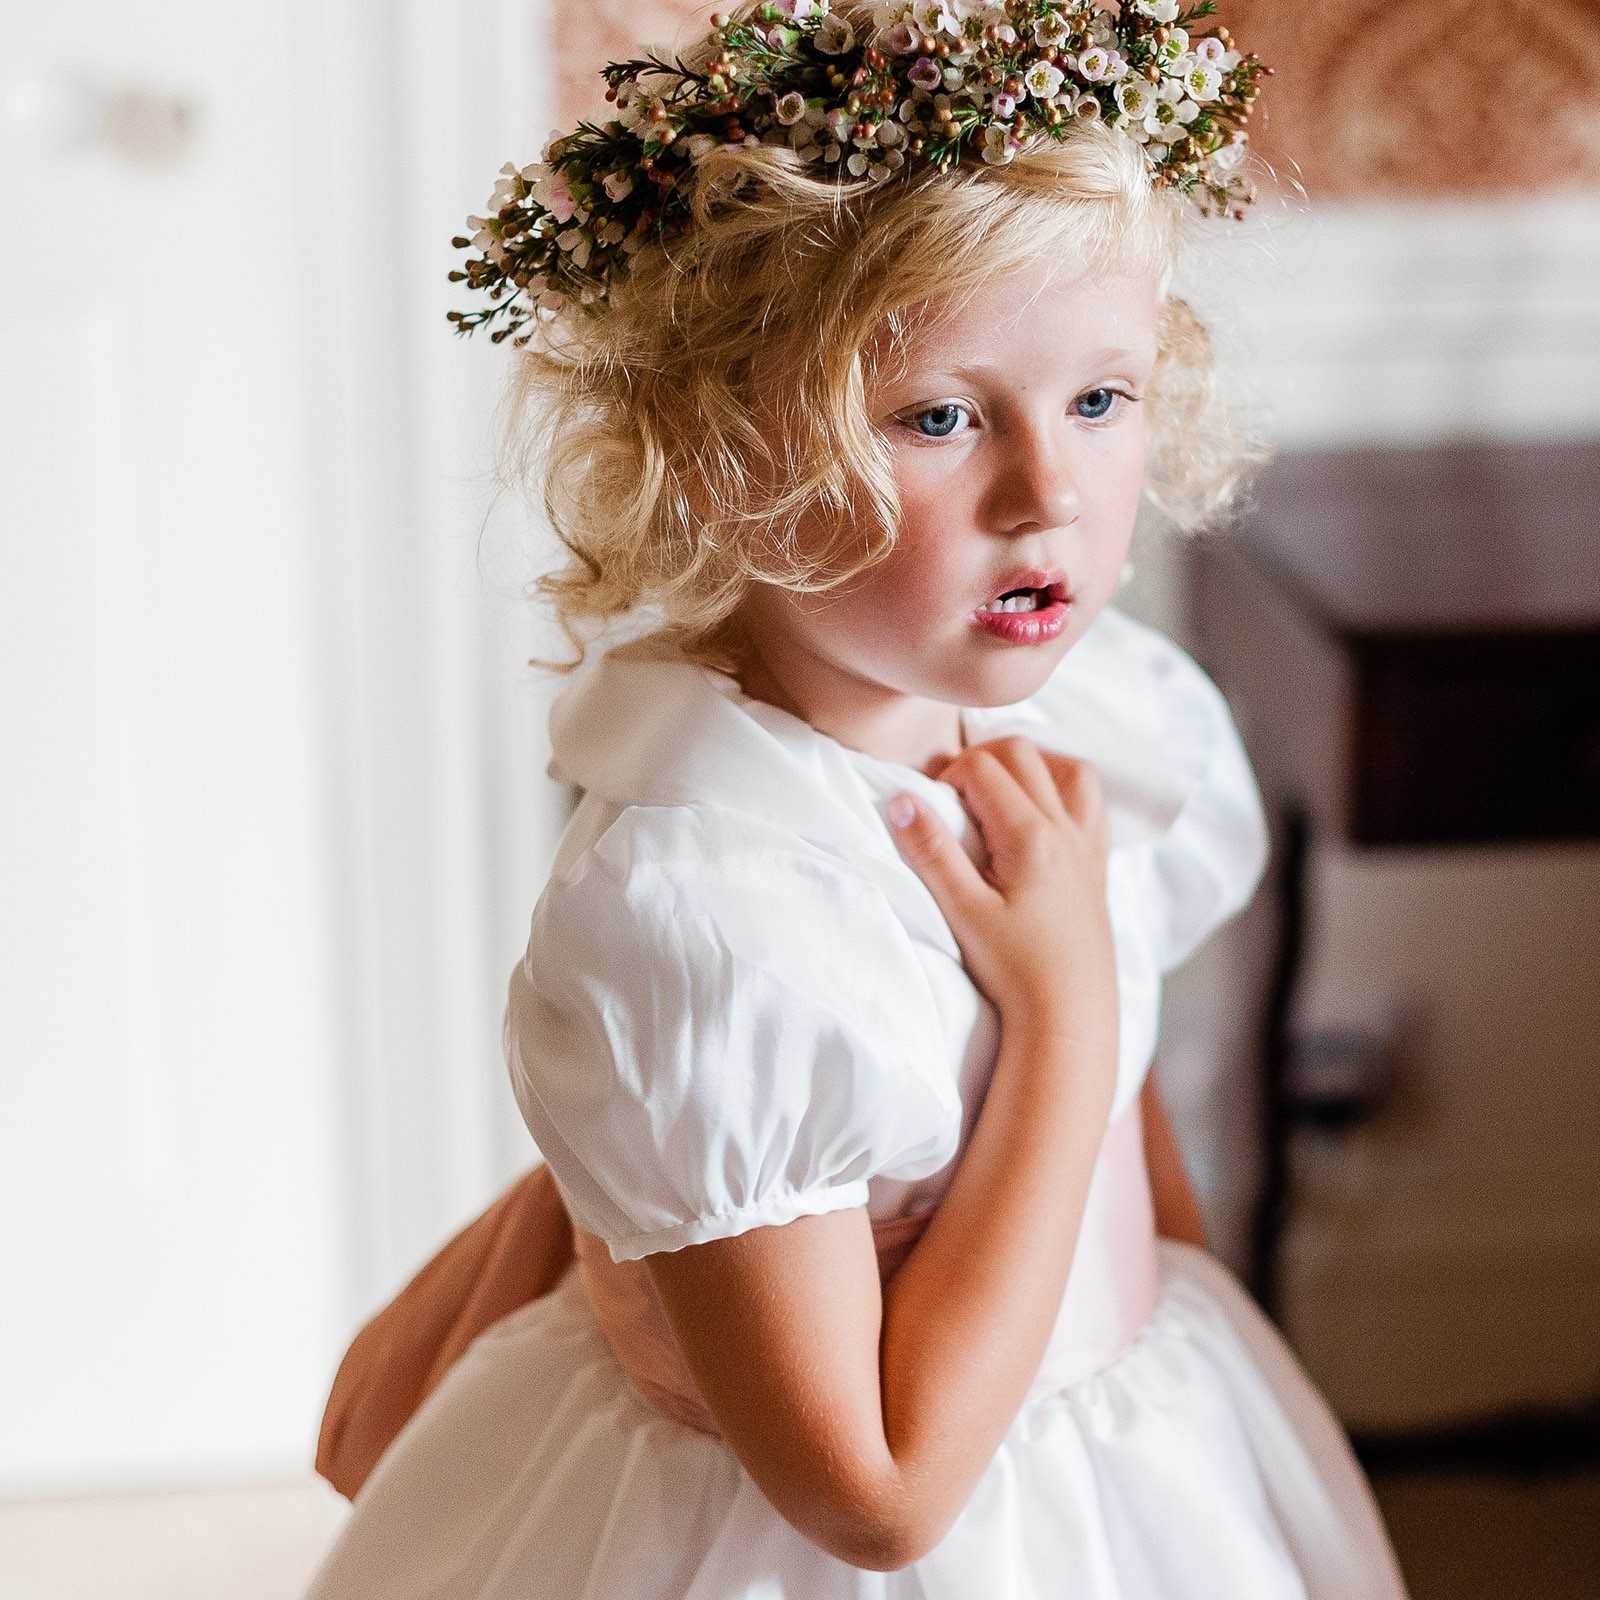 Eulalie white flower girl dress with puff sleeves and ruffled collar and pink sash by Royal designer Little Eglantine